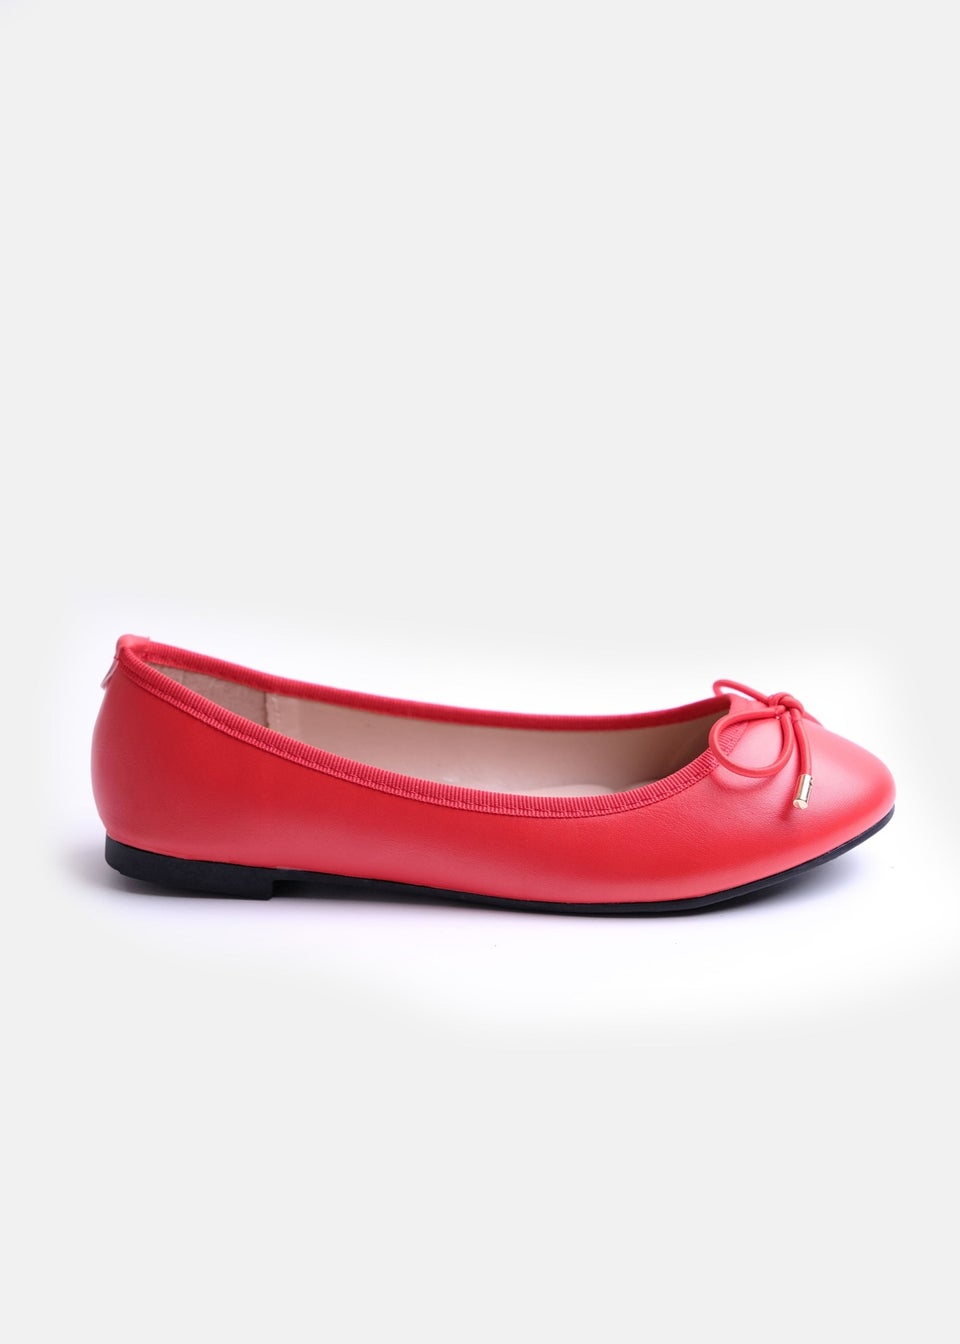 Where's That From Red Tallulah Wide Fit PU Flat Pumps